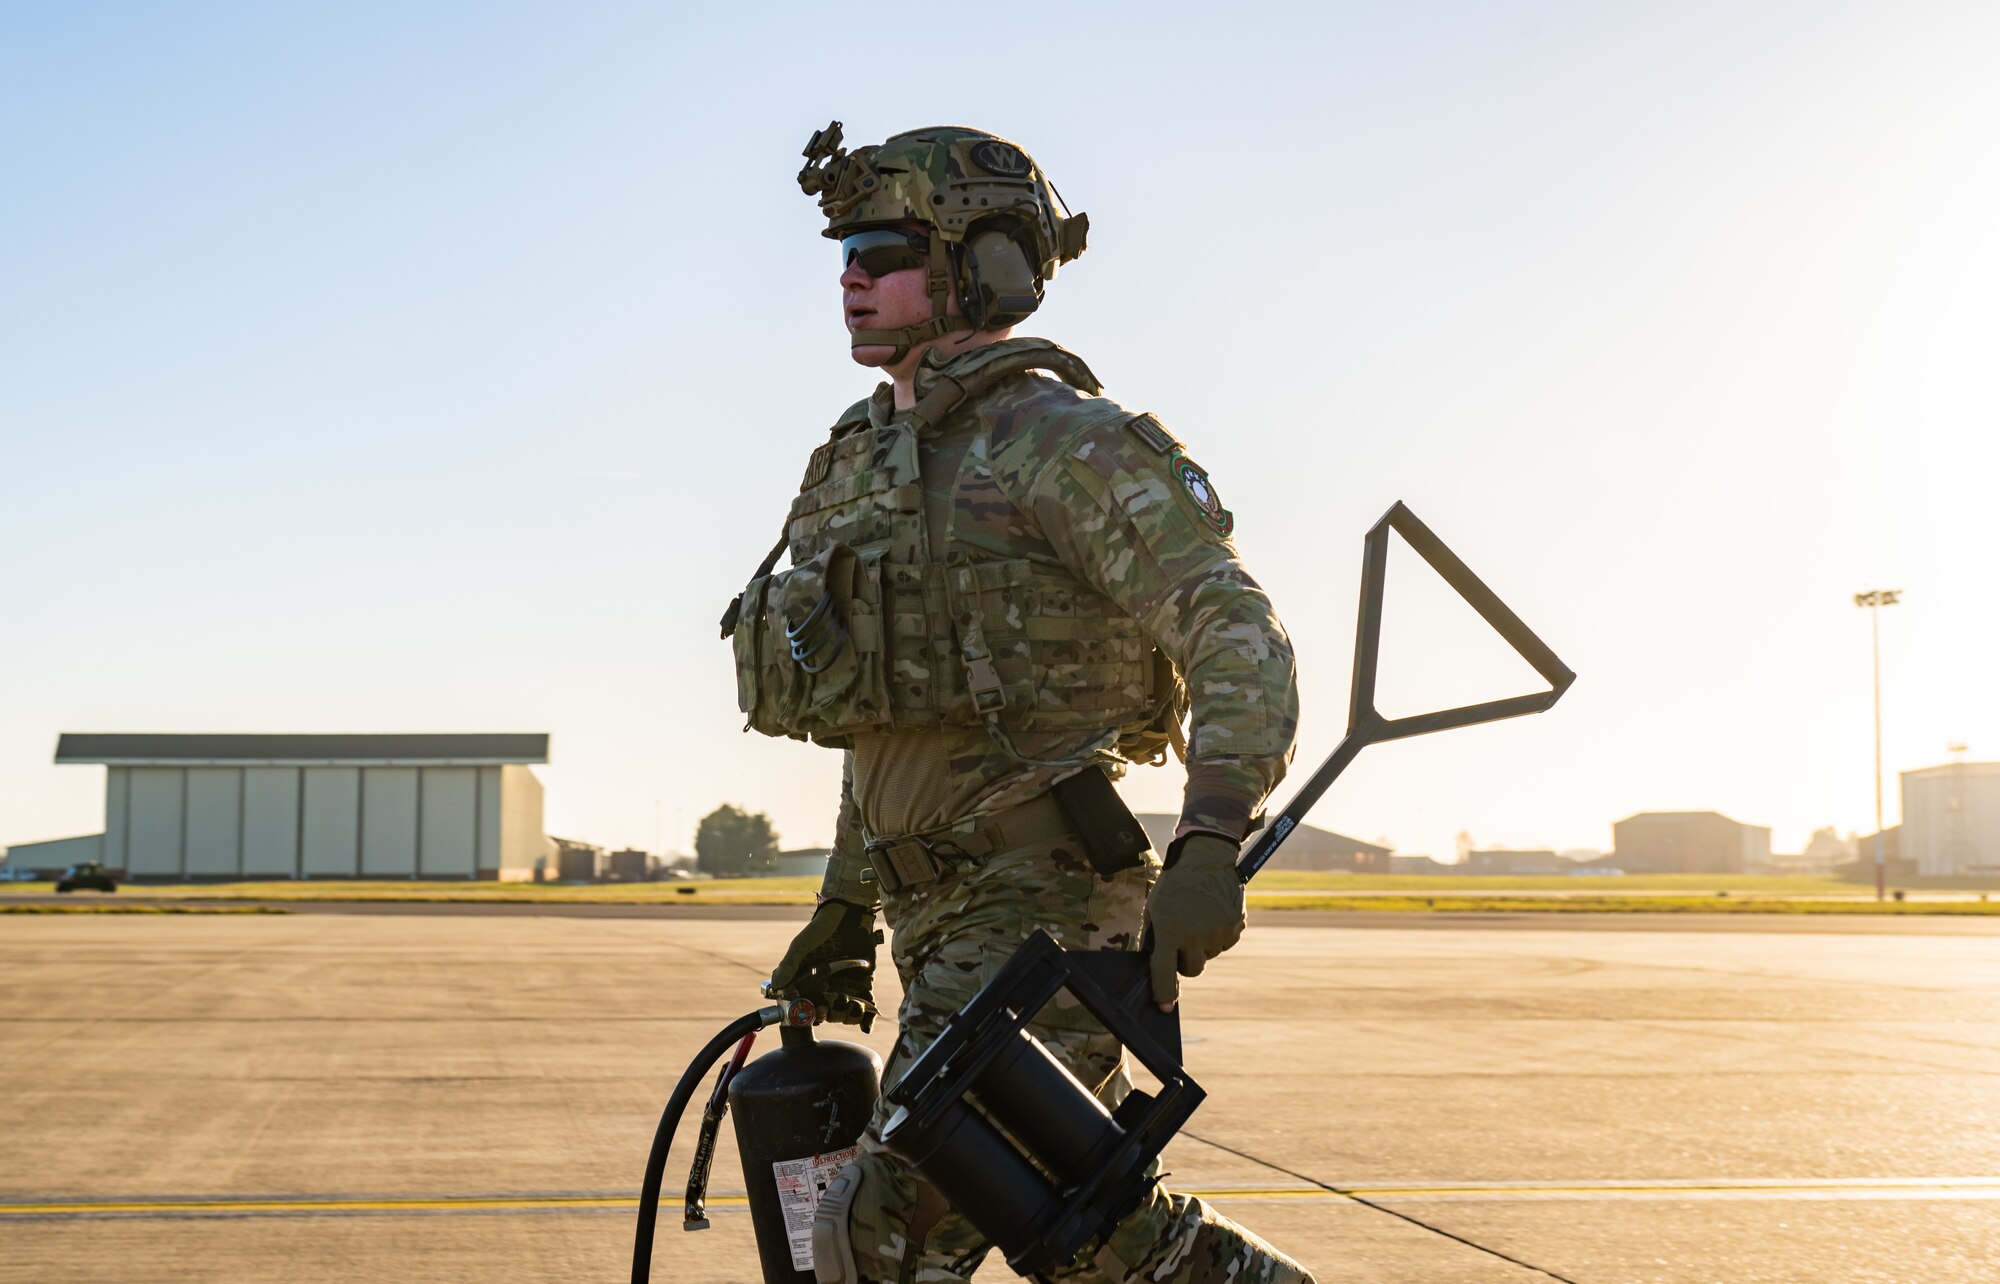 U.S. Air Force Senior Airman Benjamin Kramer, 100th Logistics Readiness Squadron forward area refueling point (FARP) specialist assigned to the 100th Air Refueling Wing, carries gear across the flight line during FARP training at Royal Air Force Mildenhall, England, Feb. 6, 2023. Only select Airmen within the petroleum, oil, and lubricants career field are trained to perform FARP duties, as it requires both mental and physical strength to execute the no-fail mission. (U.S. Air Force photo by Staff Sgt. Kevin Long)